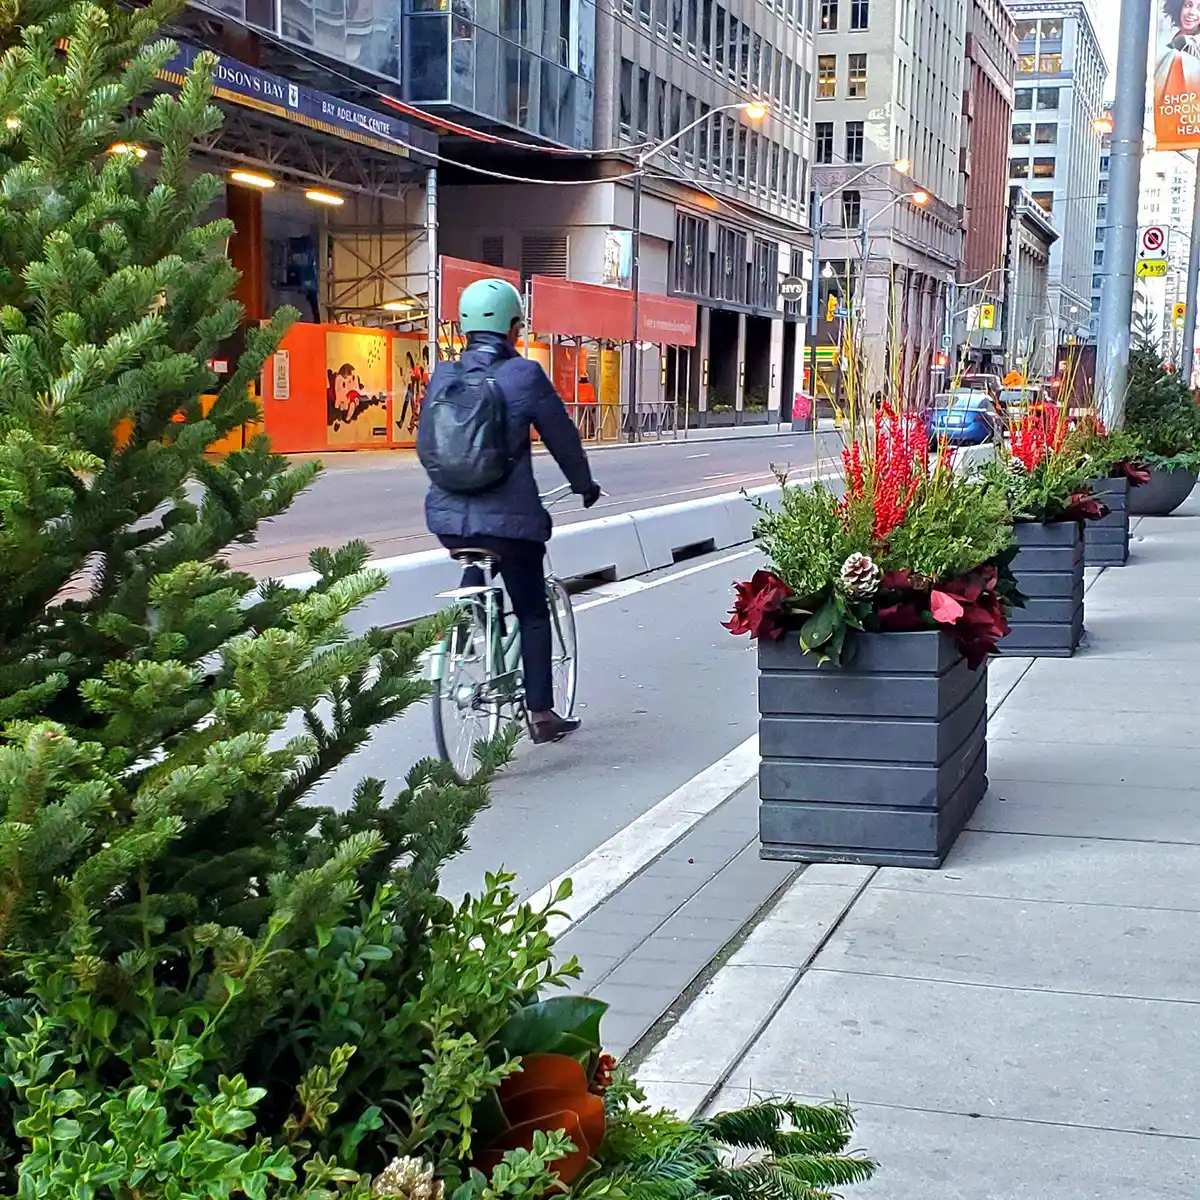 a person riding a bicycle on the street with a row of planters on the sidewalk